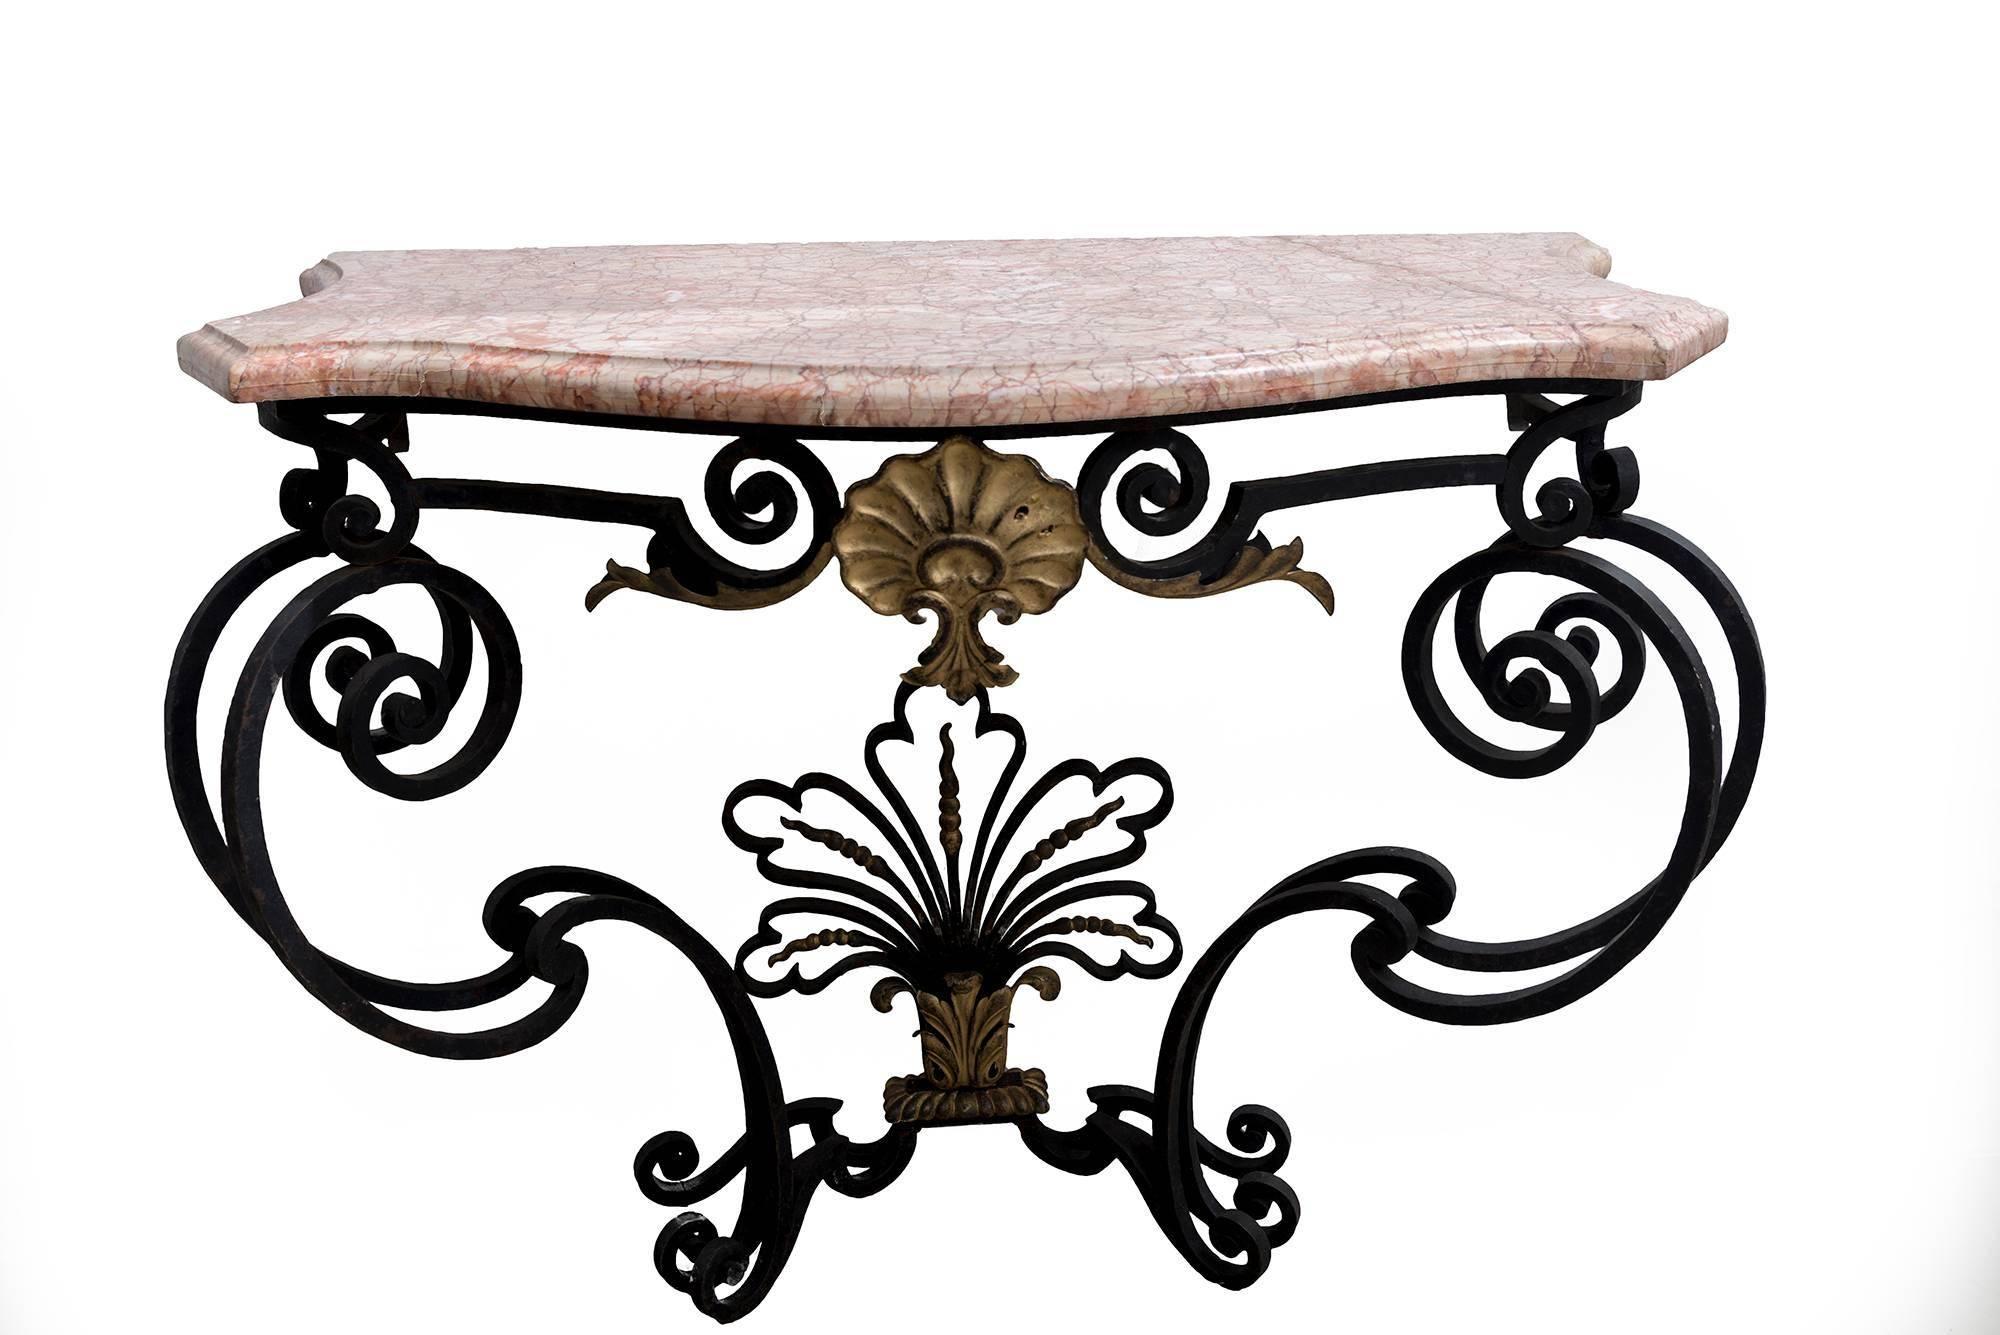 A beautiful natural wrought iron console table with pink marble top. Detail design underneath with gilt-work on wrought iron base.